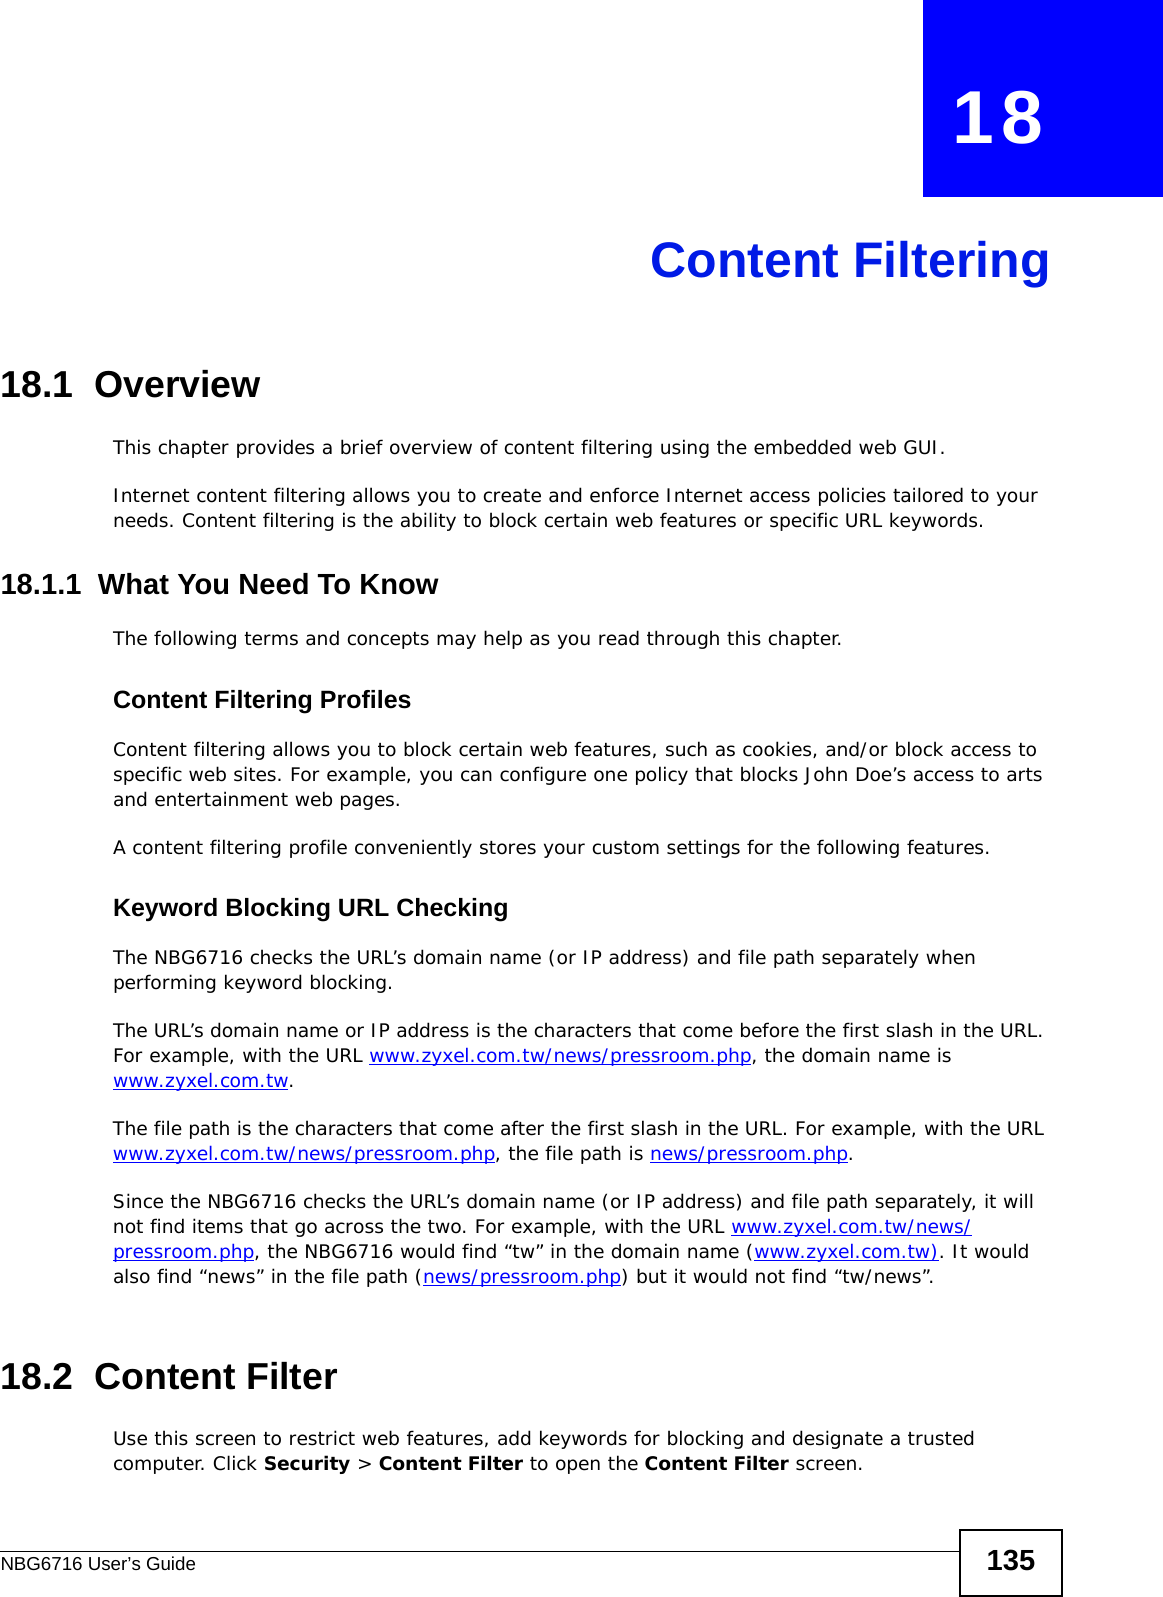 NBG6716 User’s Guide 135CHAPTER   18Content Filtering18.1  OverviewThis chapter provides a brief overview of content filtering using the embedded web GUI.Internet content filtering allows you to create and enforce Internet access policies tailored to your needs. Content filtering is the ability to block certain web features or specific URL keywords.18.1.1  What You Need To KnowThe following terms and concepts may help as you read through this chapter.Content Filtering ProfilesContent filtering allows you to block certain web features, such as cookies, and/or block access to specific web sites. For example, you can configure one policy that blocks John Doe’s access to arts and entertainment web pages.A content filtering profile conveniently stores your custom settings for the following features.Keyword Blocking URL CheckingThe NBG6716 checks the URL’s domain name (or IP address) and file path separately when performing keyword blocking. The URL’s domain name or IP address is the characters that come before the first slash in the URL. For example, with the URL www.zyxel.com.tw/news/pressroom.php, the domain name is www.zyxel.com.tw.The file path is the characters that come after the first slash in the URL. For example, with the URL www.zyxel.com.tw/news/pressroom.php, the file path is news/pressroom.php.Since the NBG6716 checks the URL’s domain name (or IP address) and file path separately, it will not find items that go across the two. For example, with the URL www.zyxel.com.tw/news/pressroom.php, the NBG6716 would find “tw” in the domain name (www.zyxel.com.tw). It would also find “news” in the file path (news/pressroom.php) but it would not find “tw/news”.18.2  Content FilterUse this screen to restrict web features, add keywords for blocking and designate a trusted computer. Click Security &gt; Content Filter to open the Content Filter screen. 